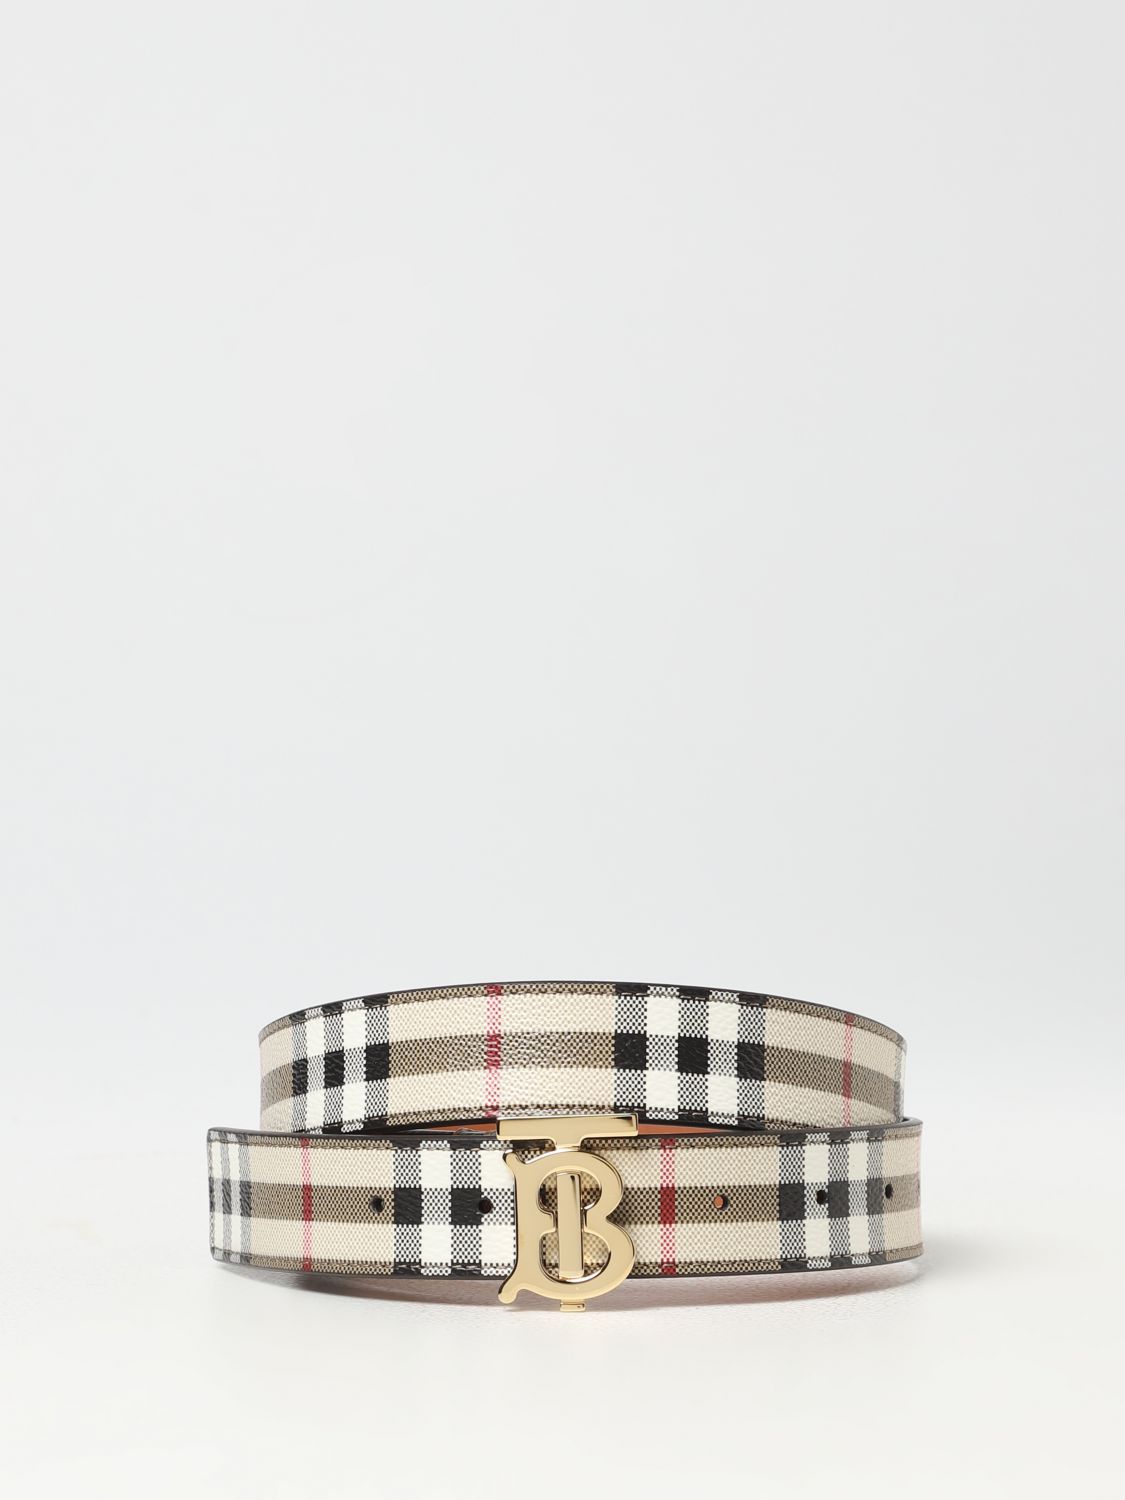 Shop Burberry 2023-24FW Belts (8070410A1191, 8070410 A1191, 8070410,  BURBERRY CHECK TB BELT) by CiaoItalia